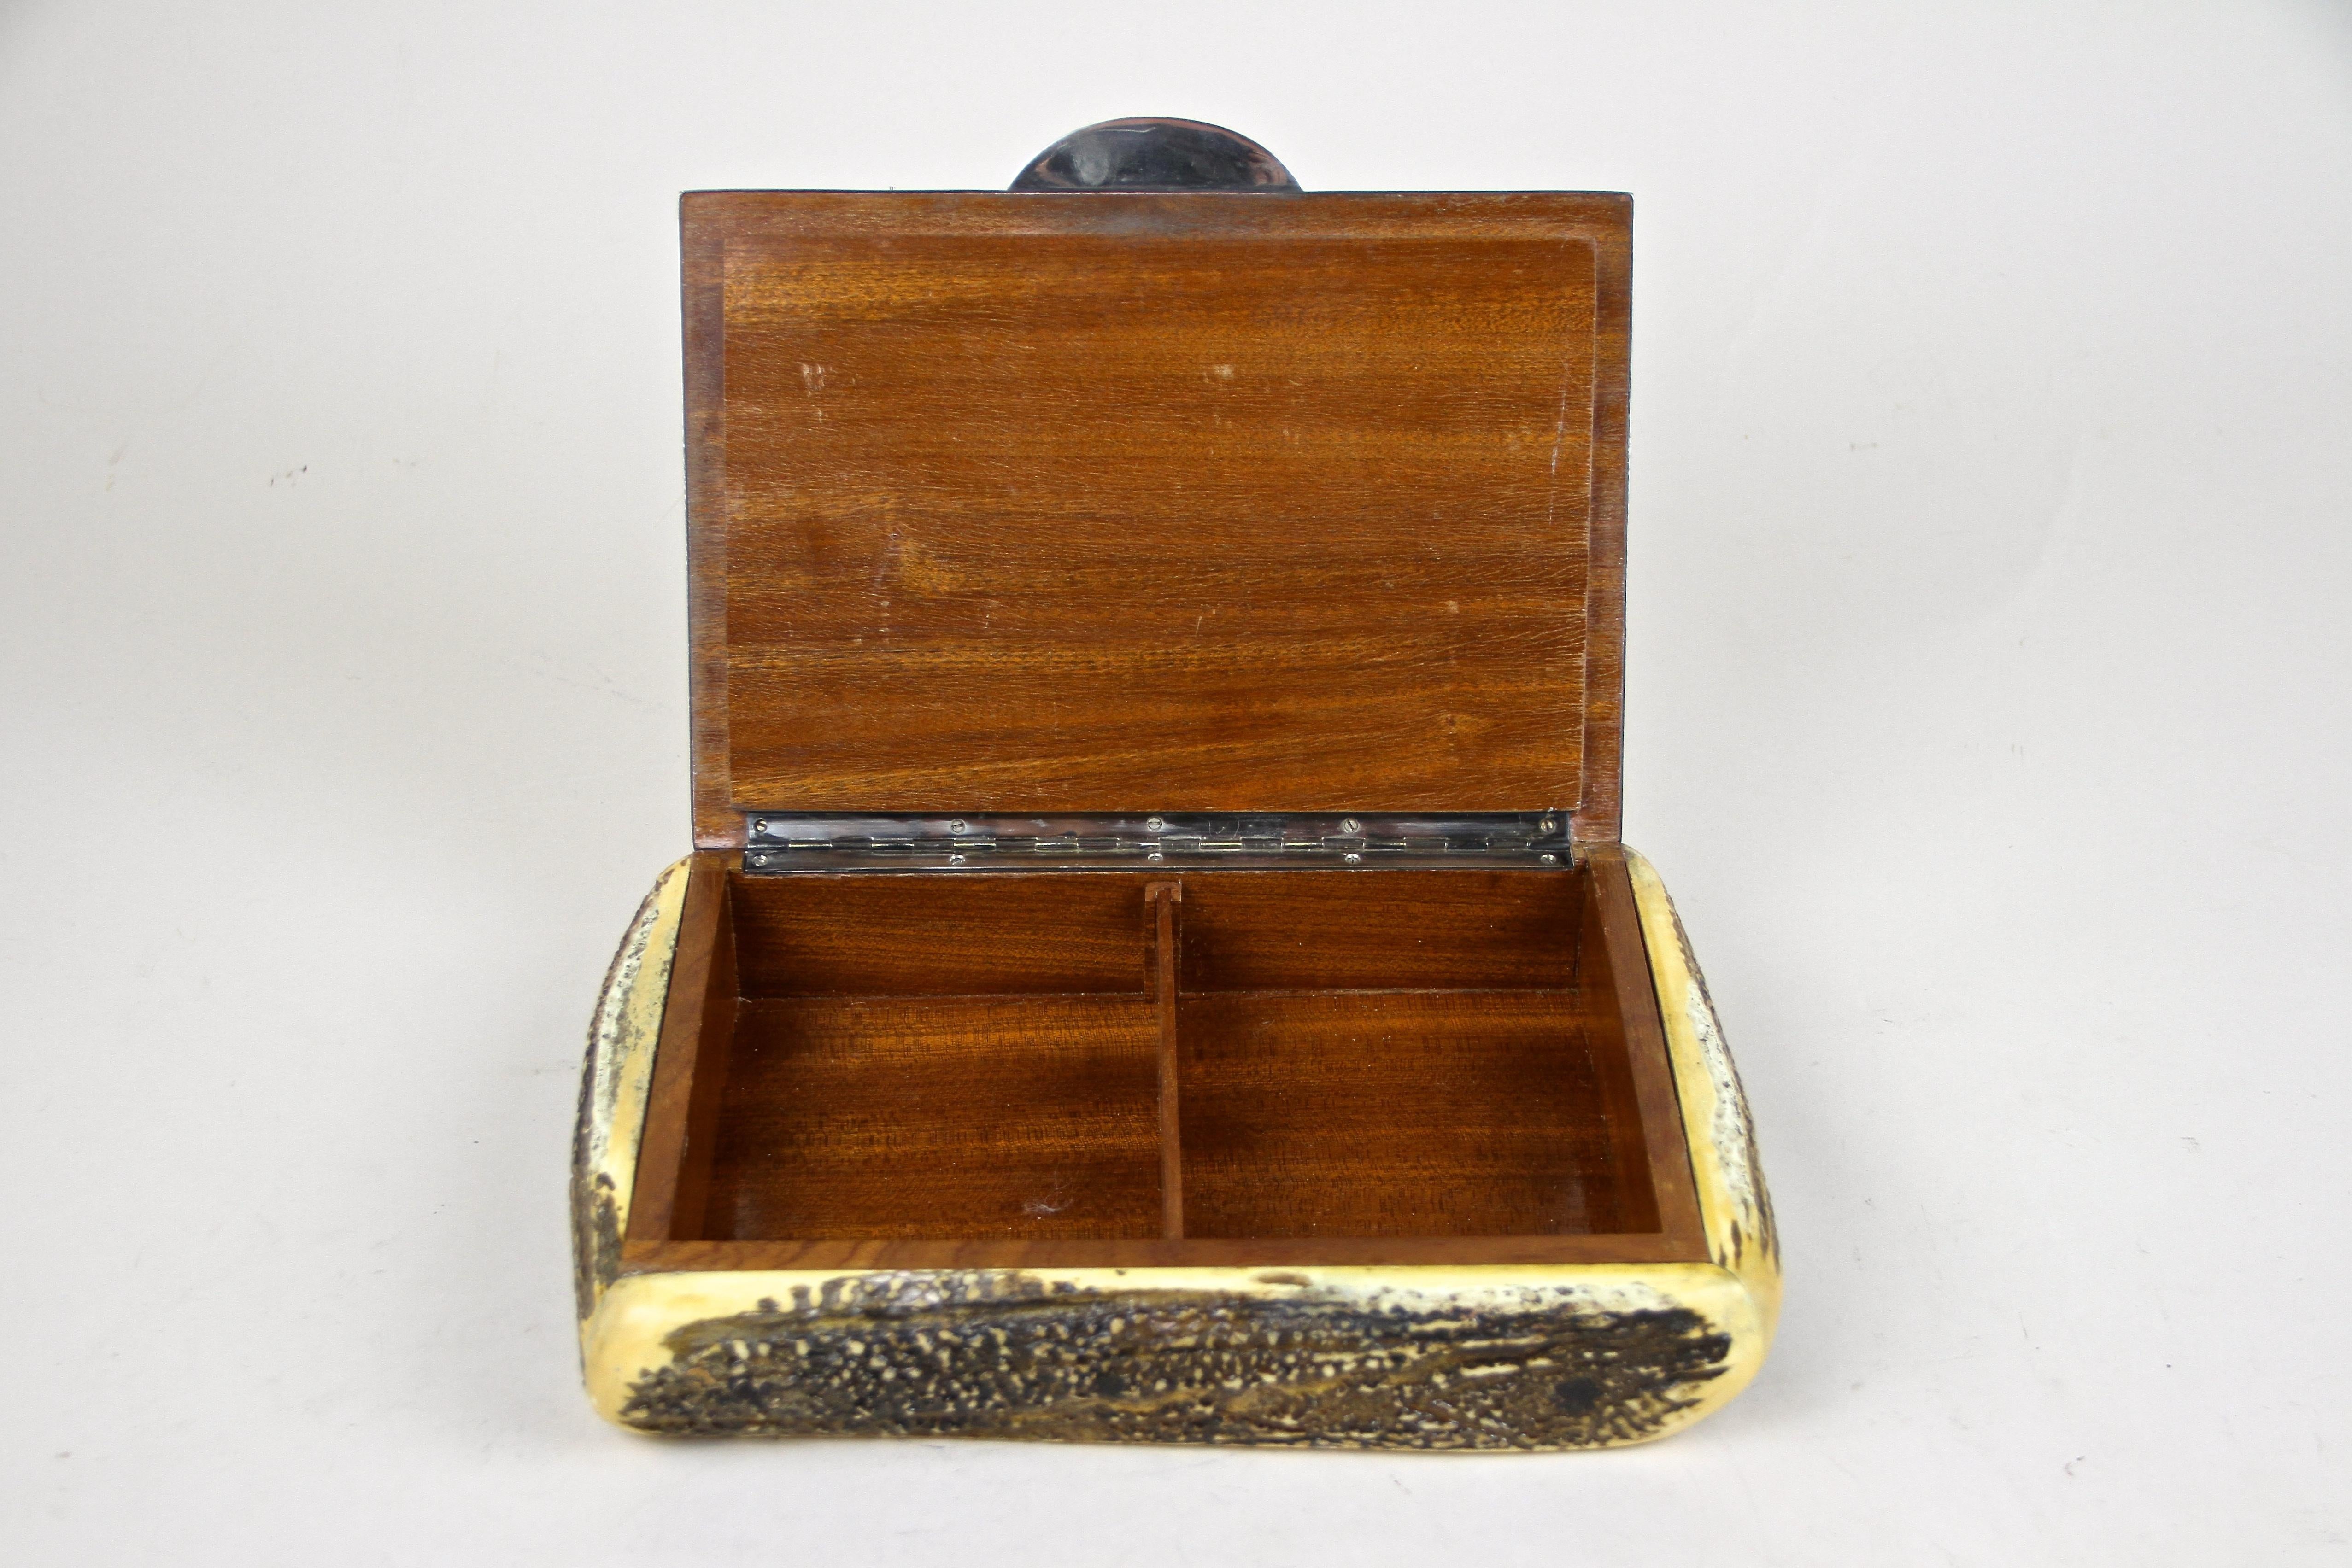 20th Century Silver Box with Deer Antler Coverings, 900 Silver Hallmarked, Austria circa 1920